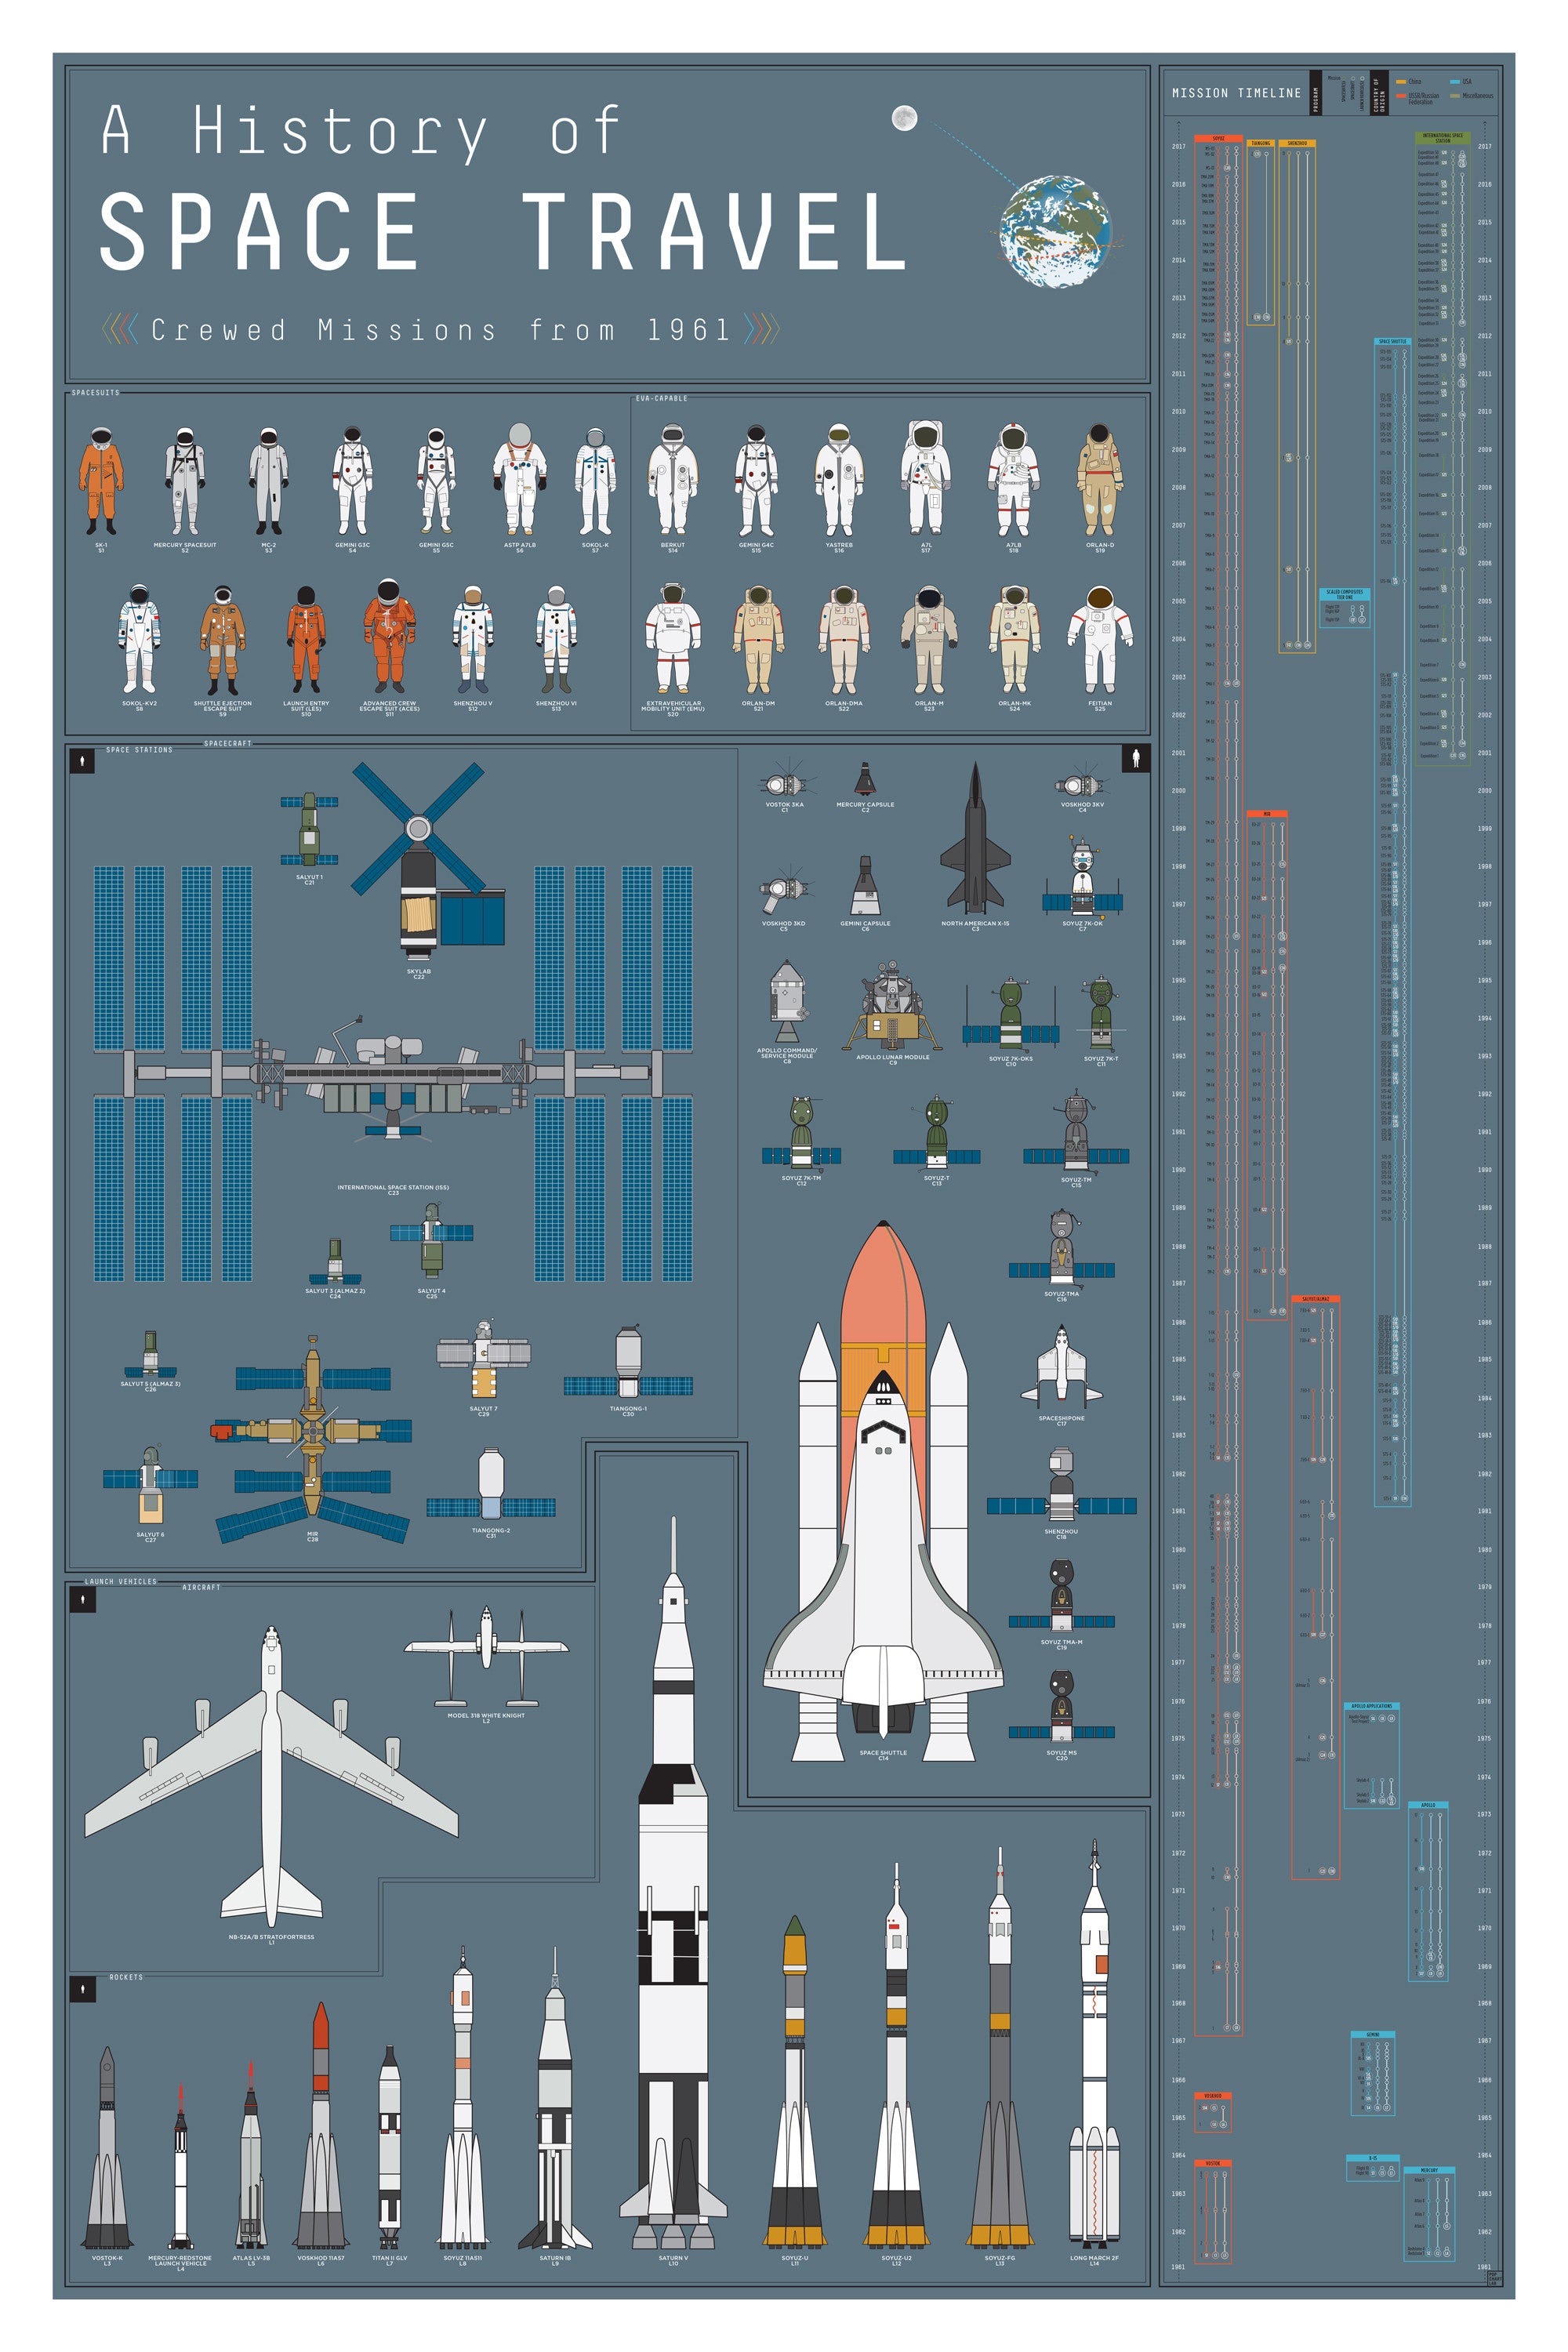 The Chart Of Cosmic Exploration Poster